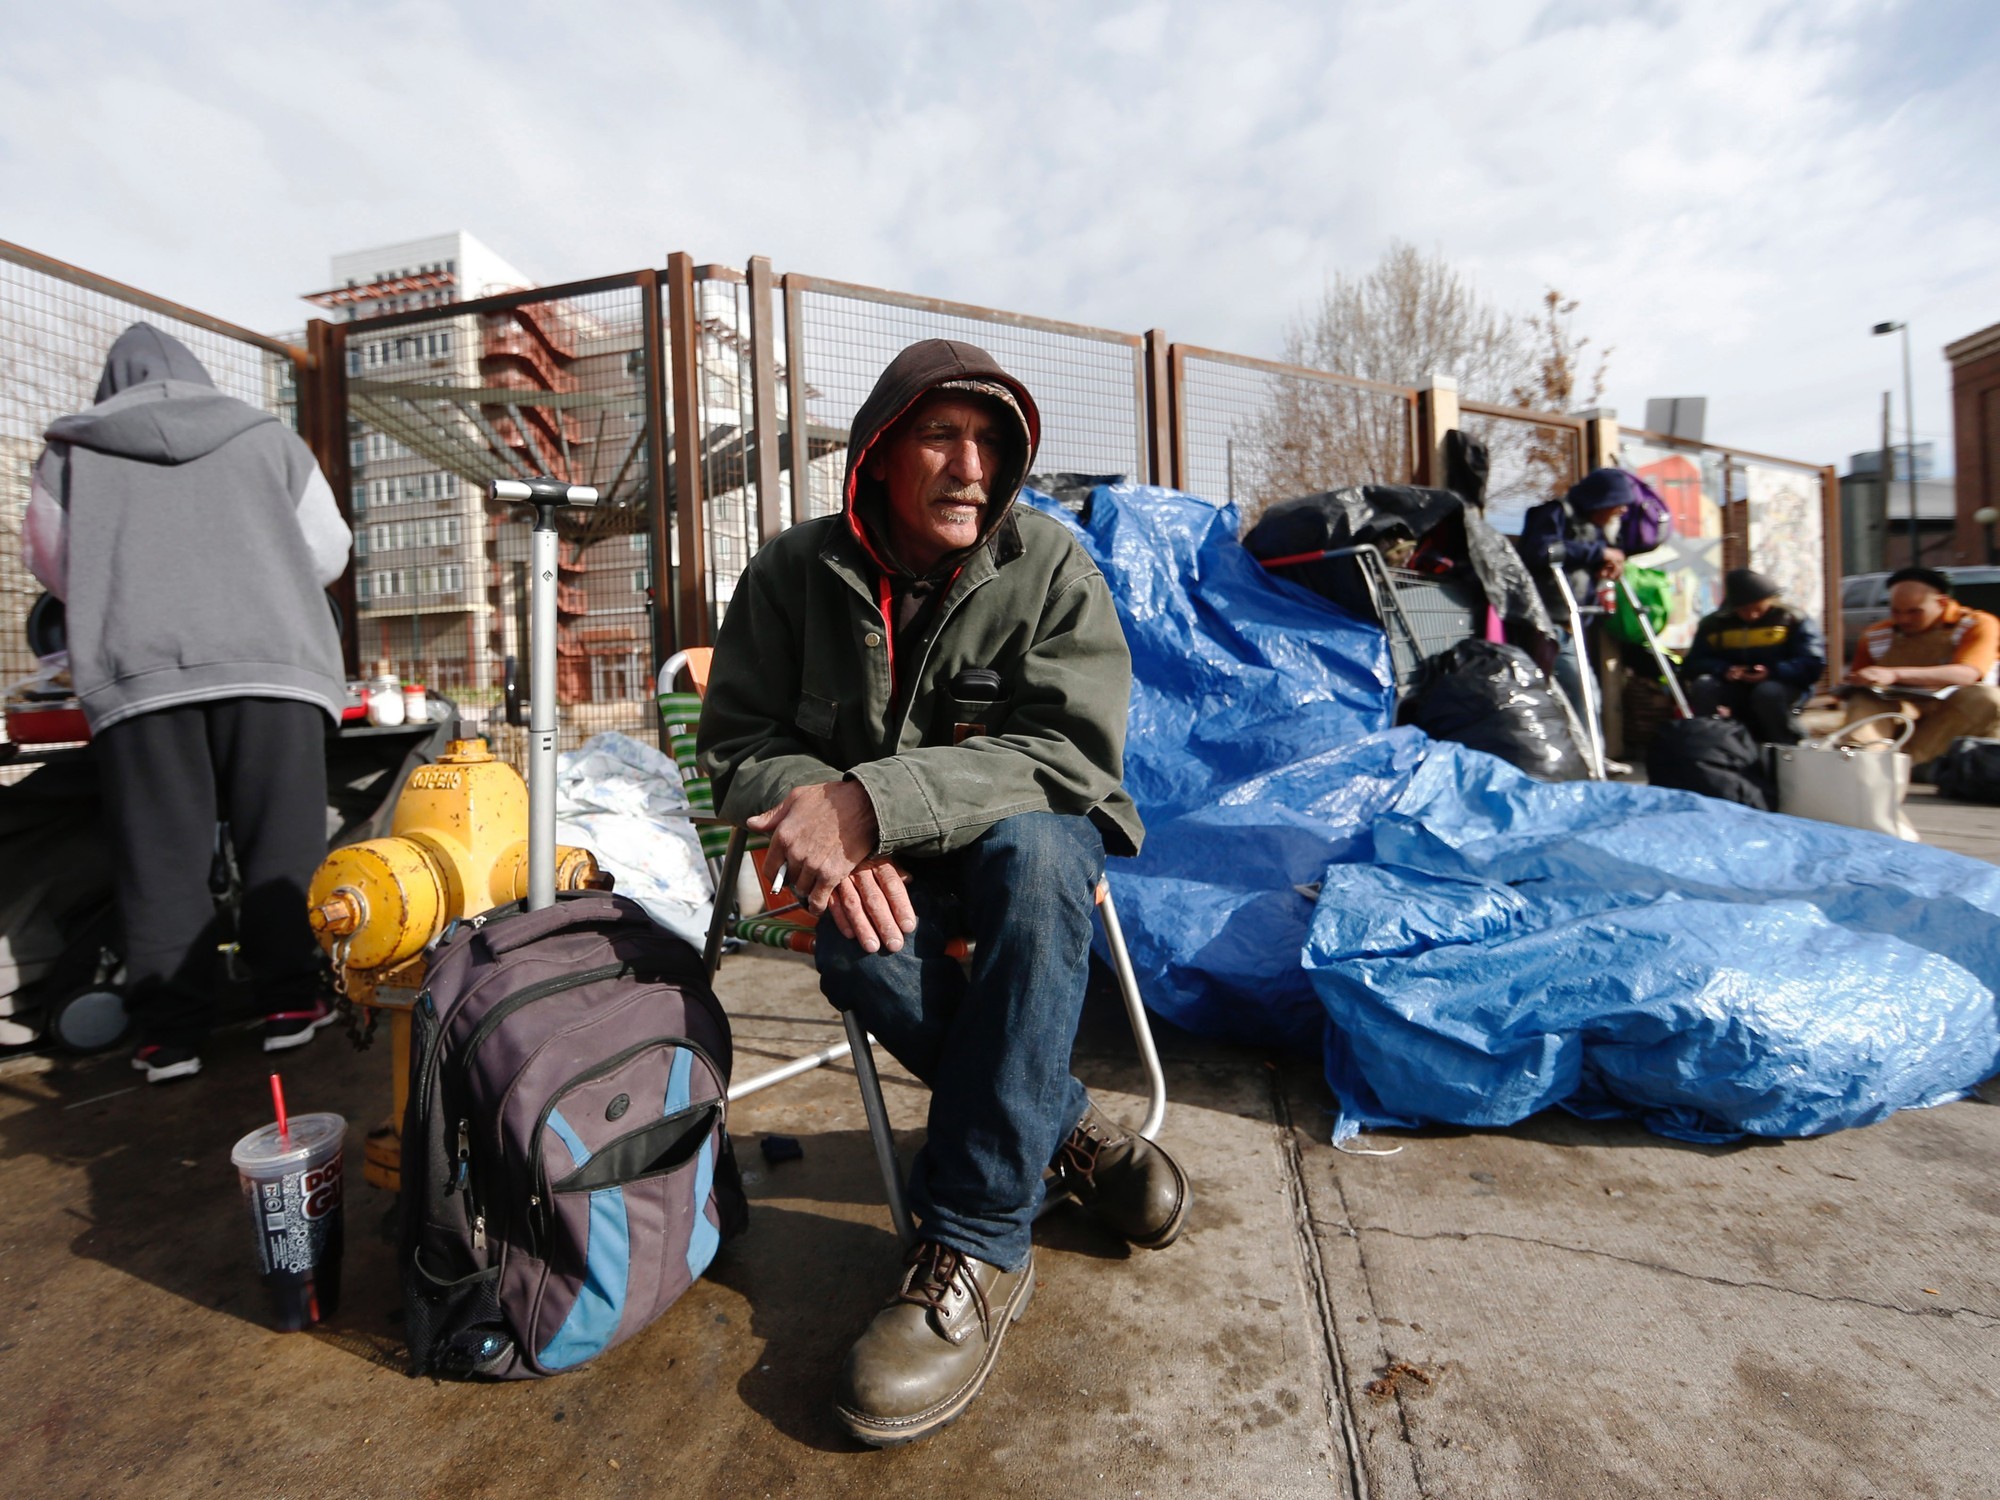 Colorado Using $3 Million in Tax Revenue To Feed and House the Homeless